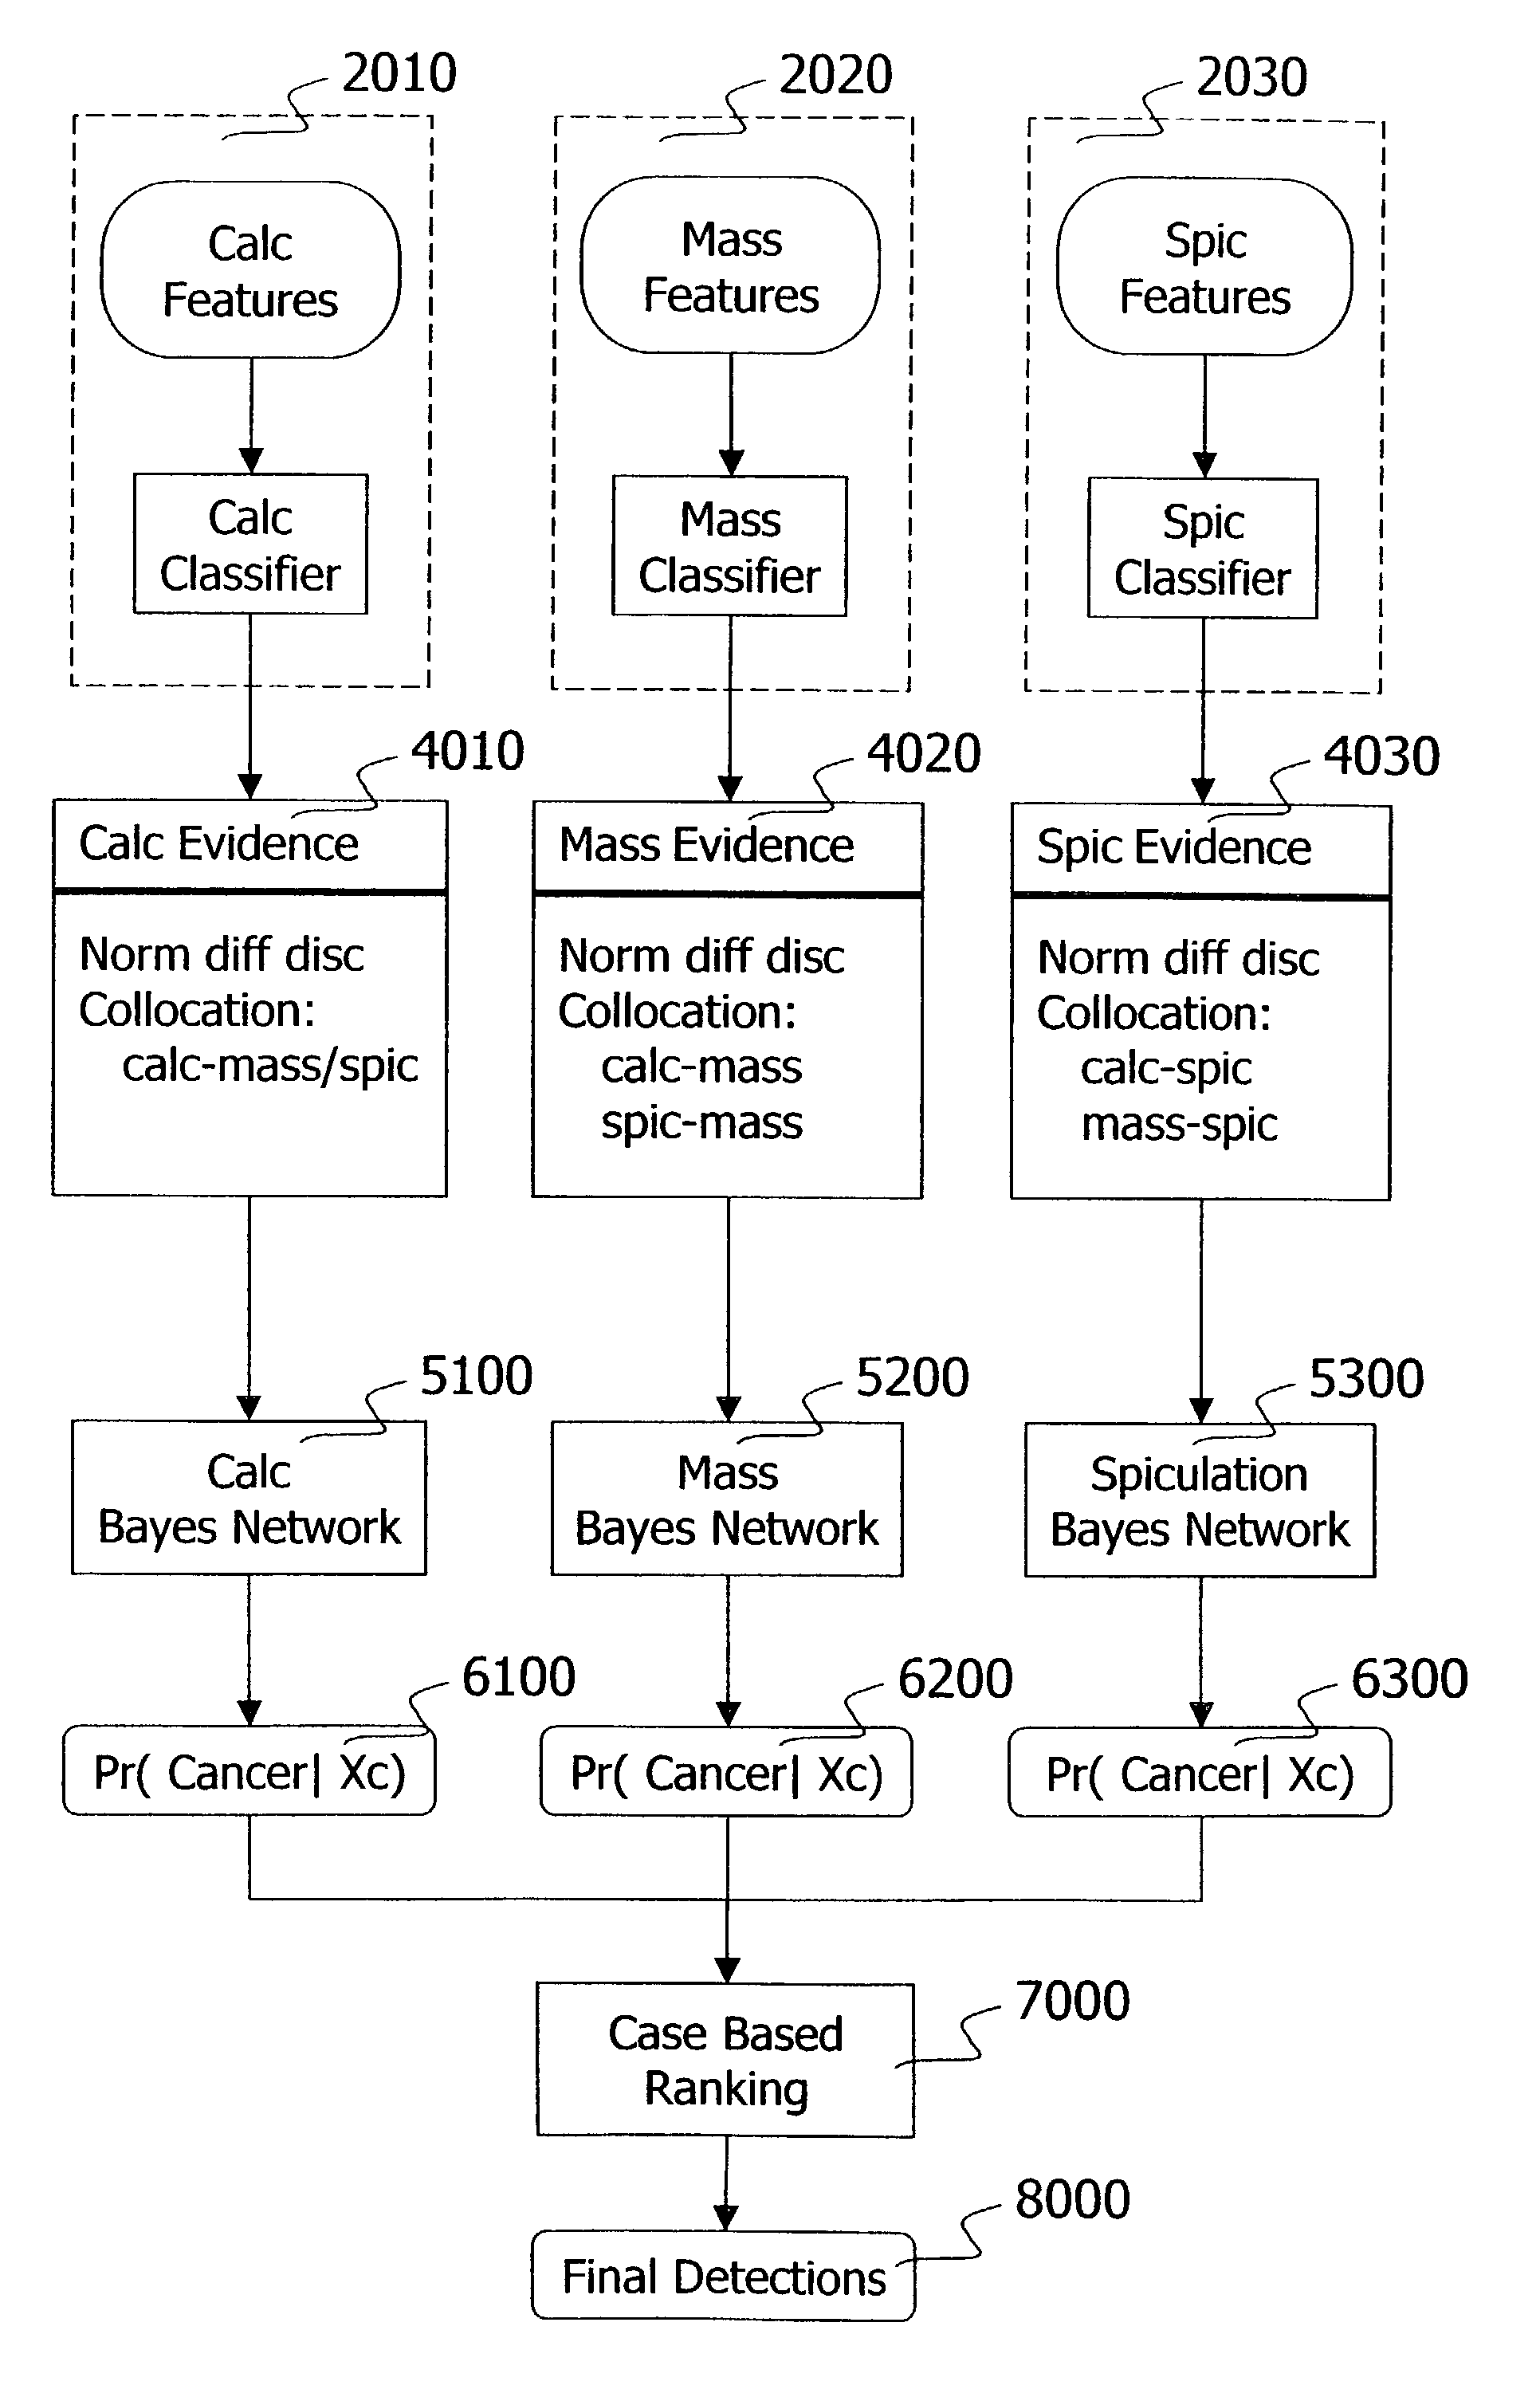 Information fusion with Bayes networks in computer-aided detection systems